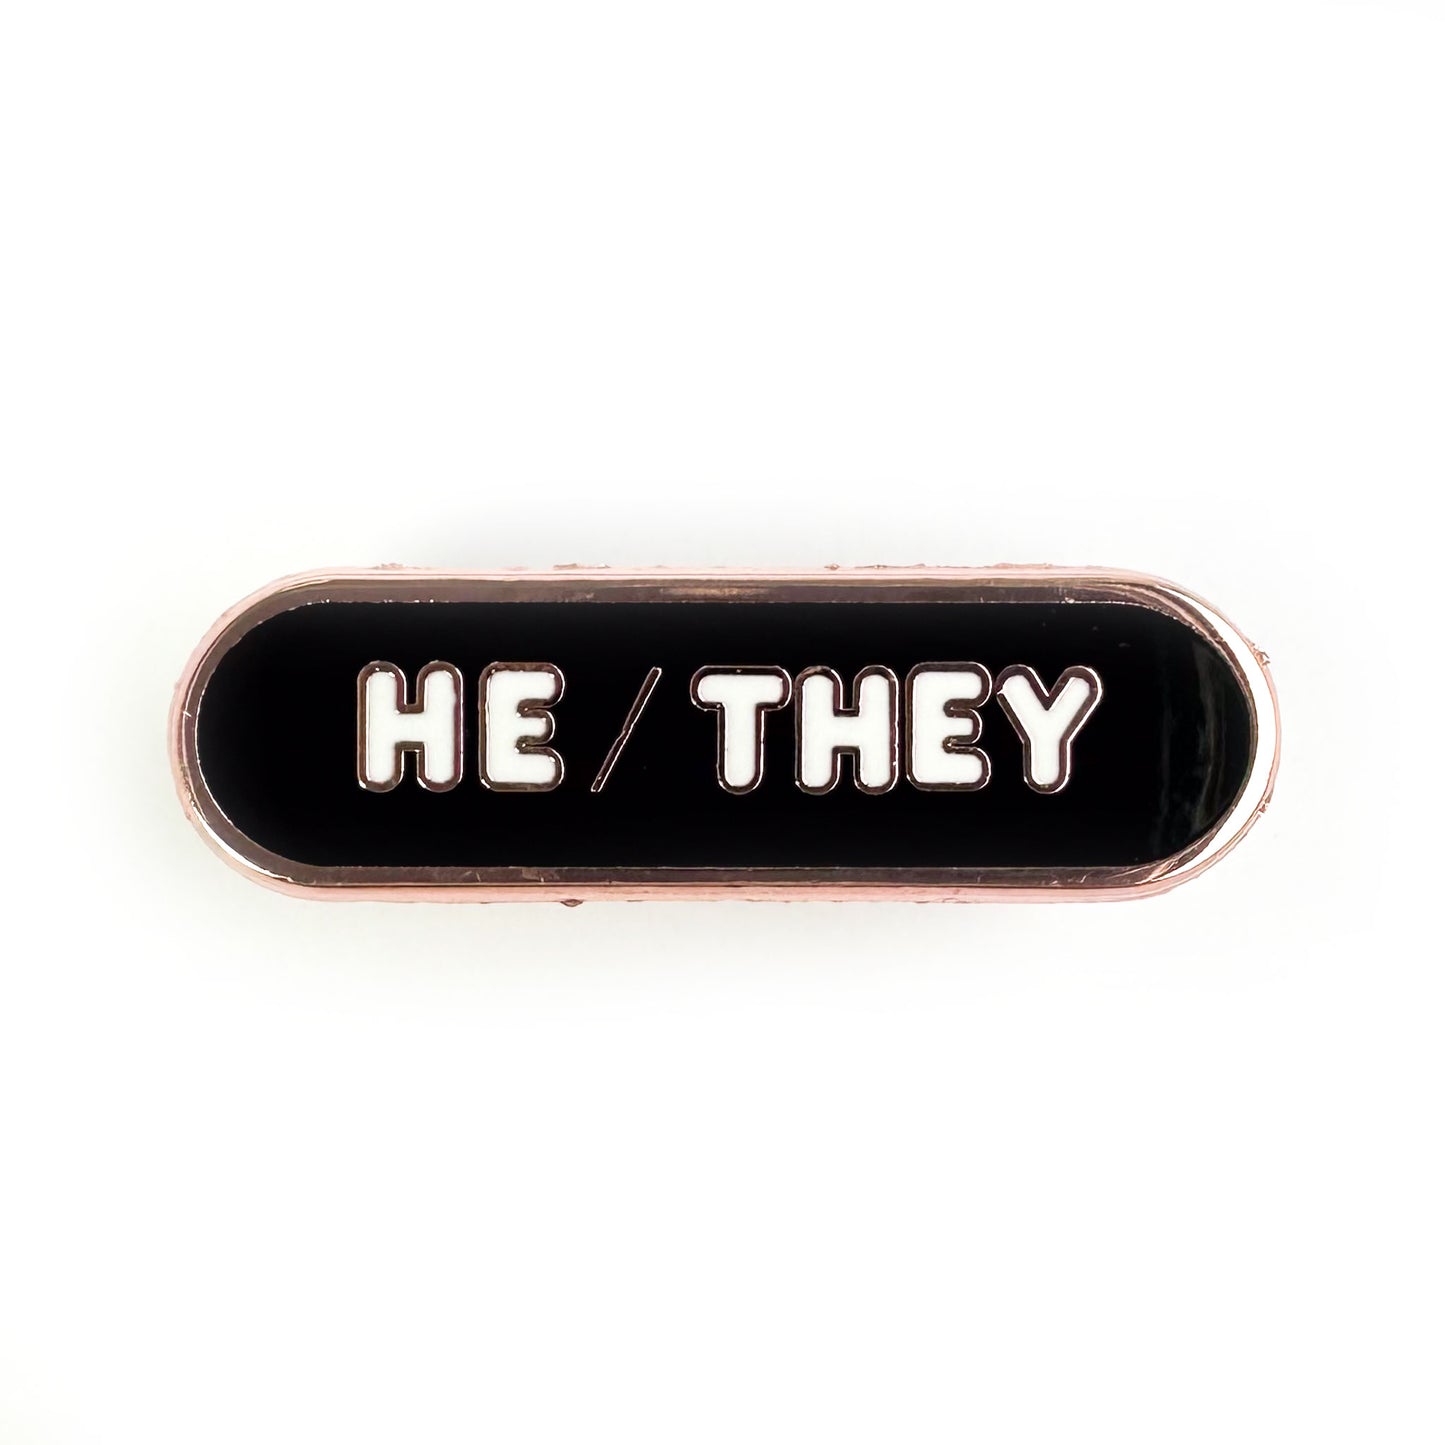 A black oval shaped pin with white words that spell "He/They" to share your pronouns.